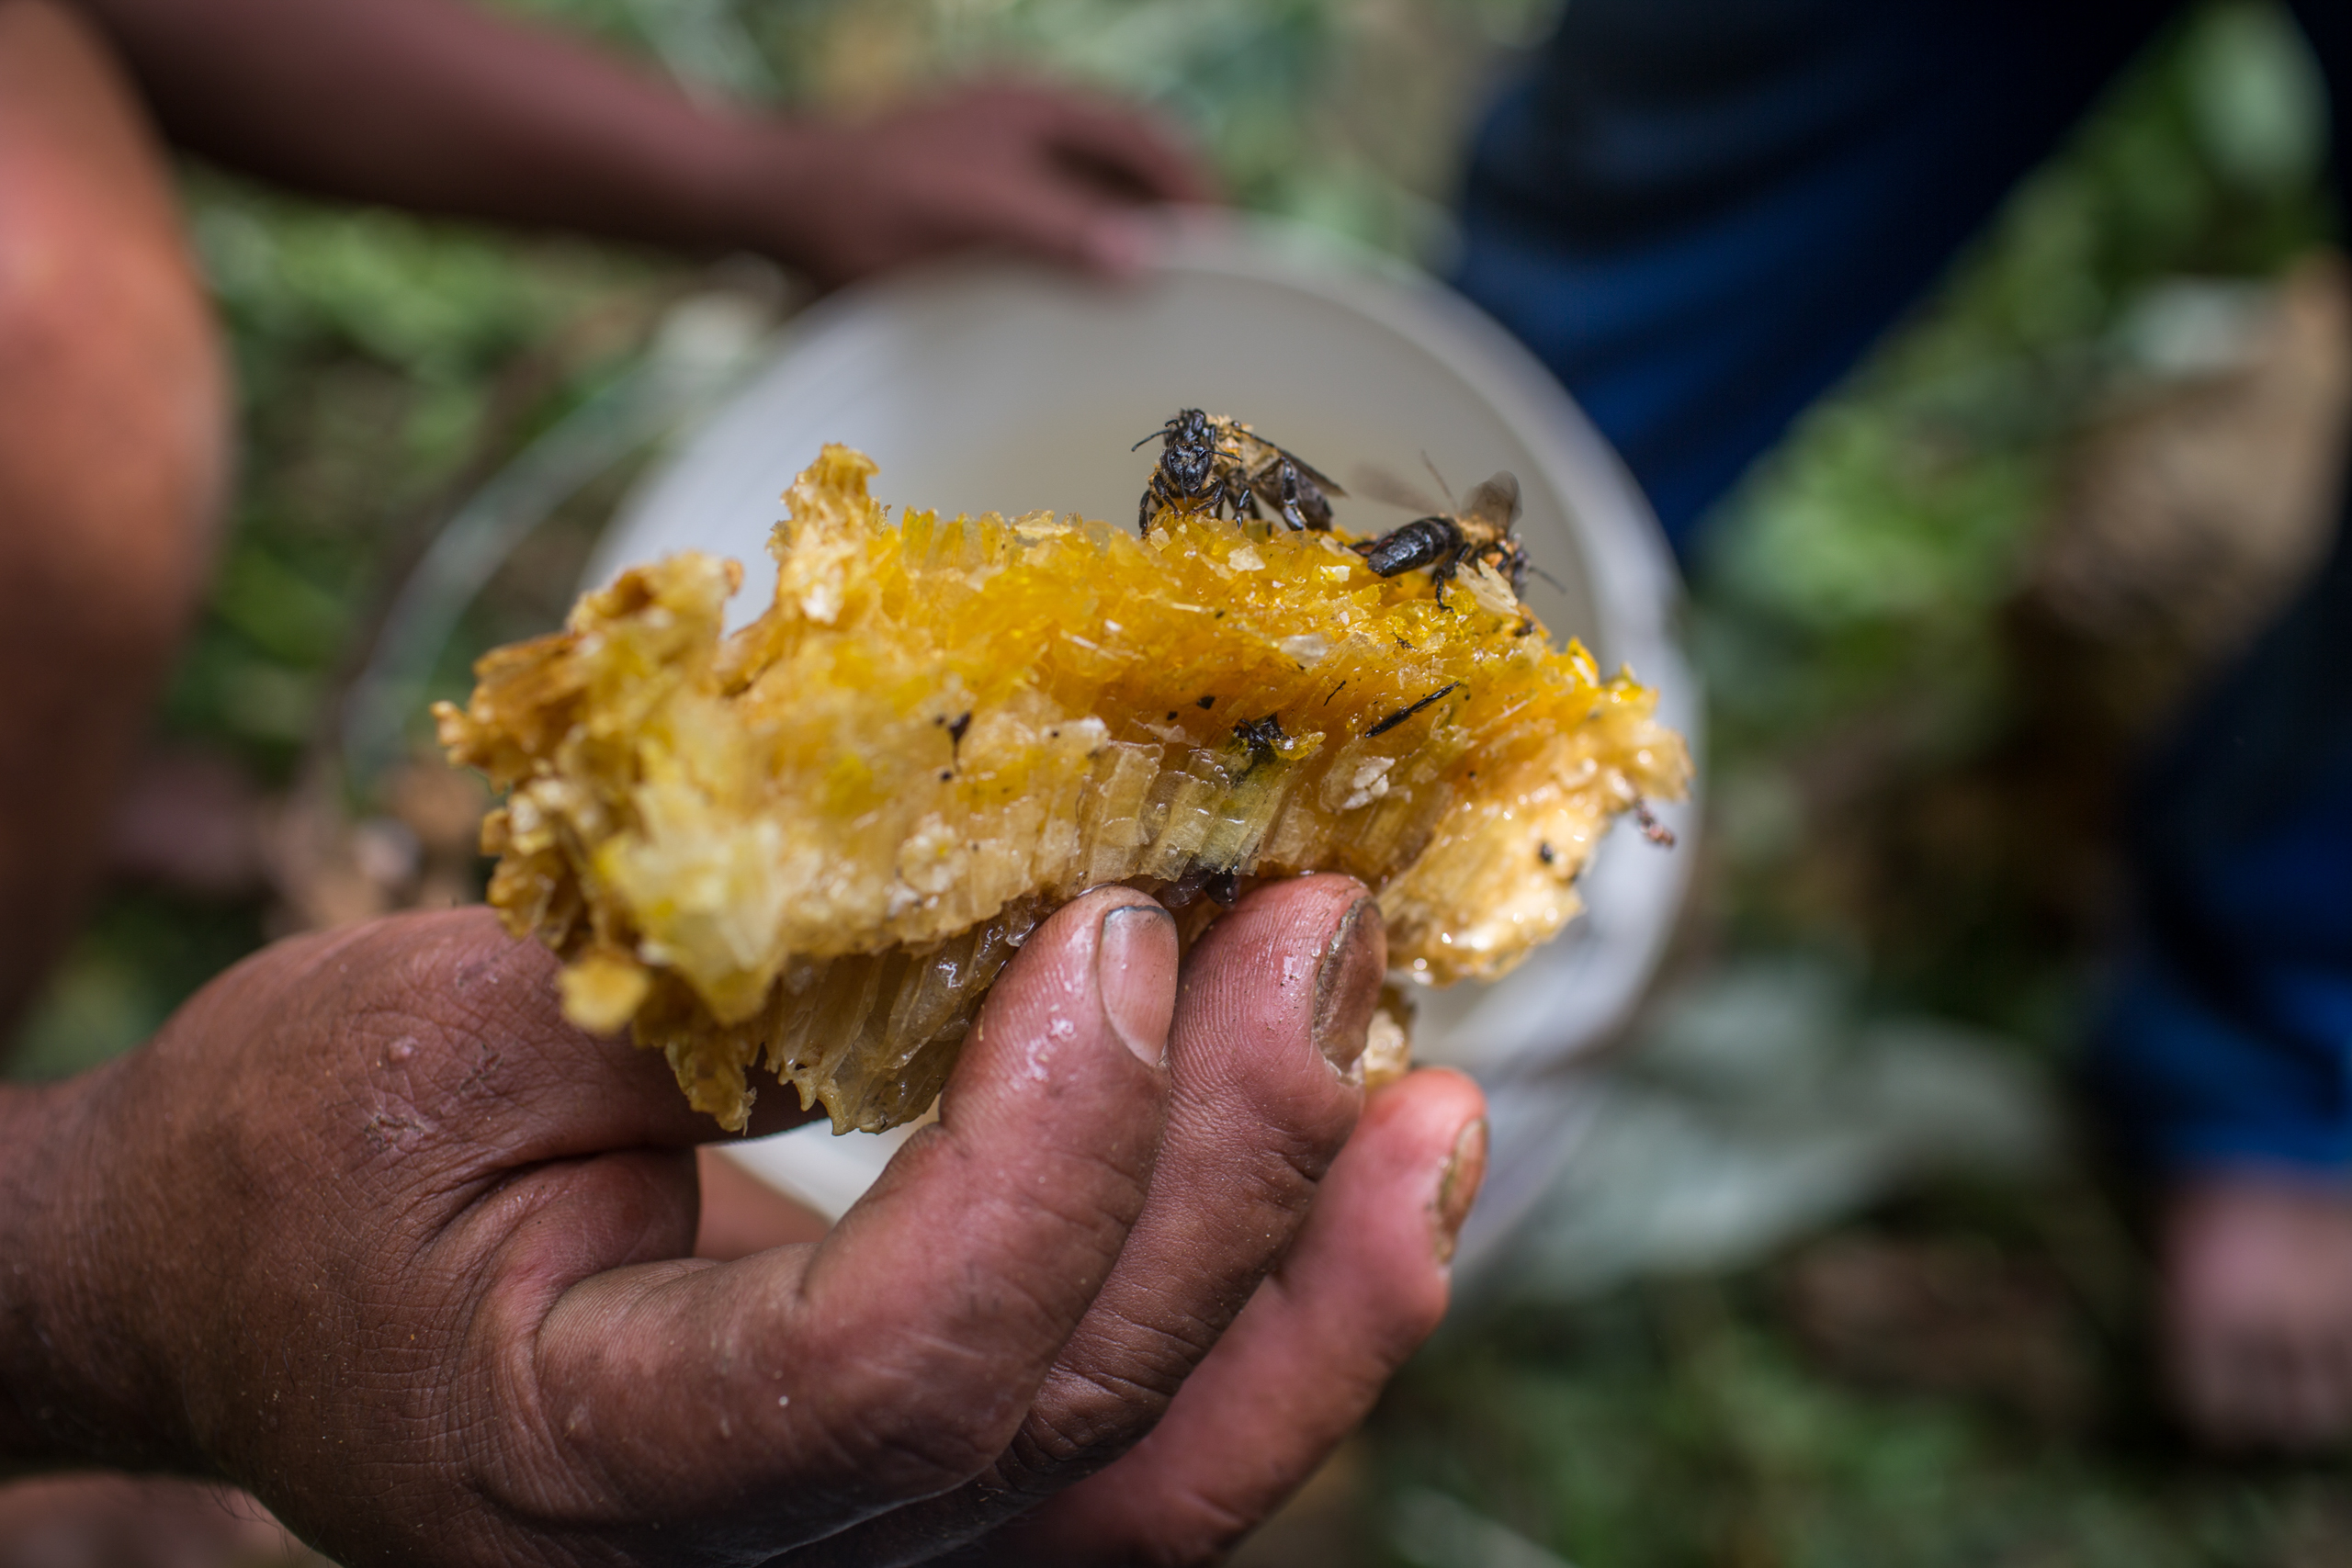 One of the members of the honey hunting group holds up a piece of dry honeycomb. Normally this would be dripping with honey.